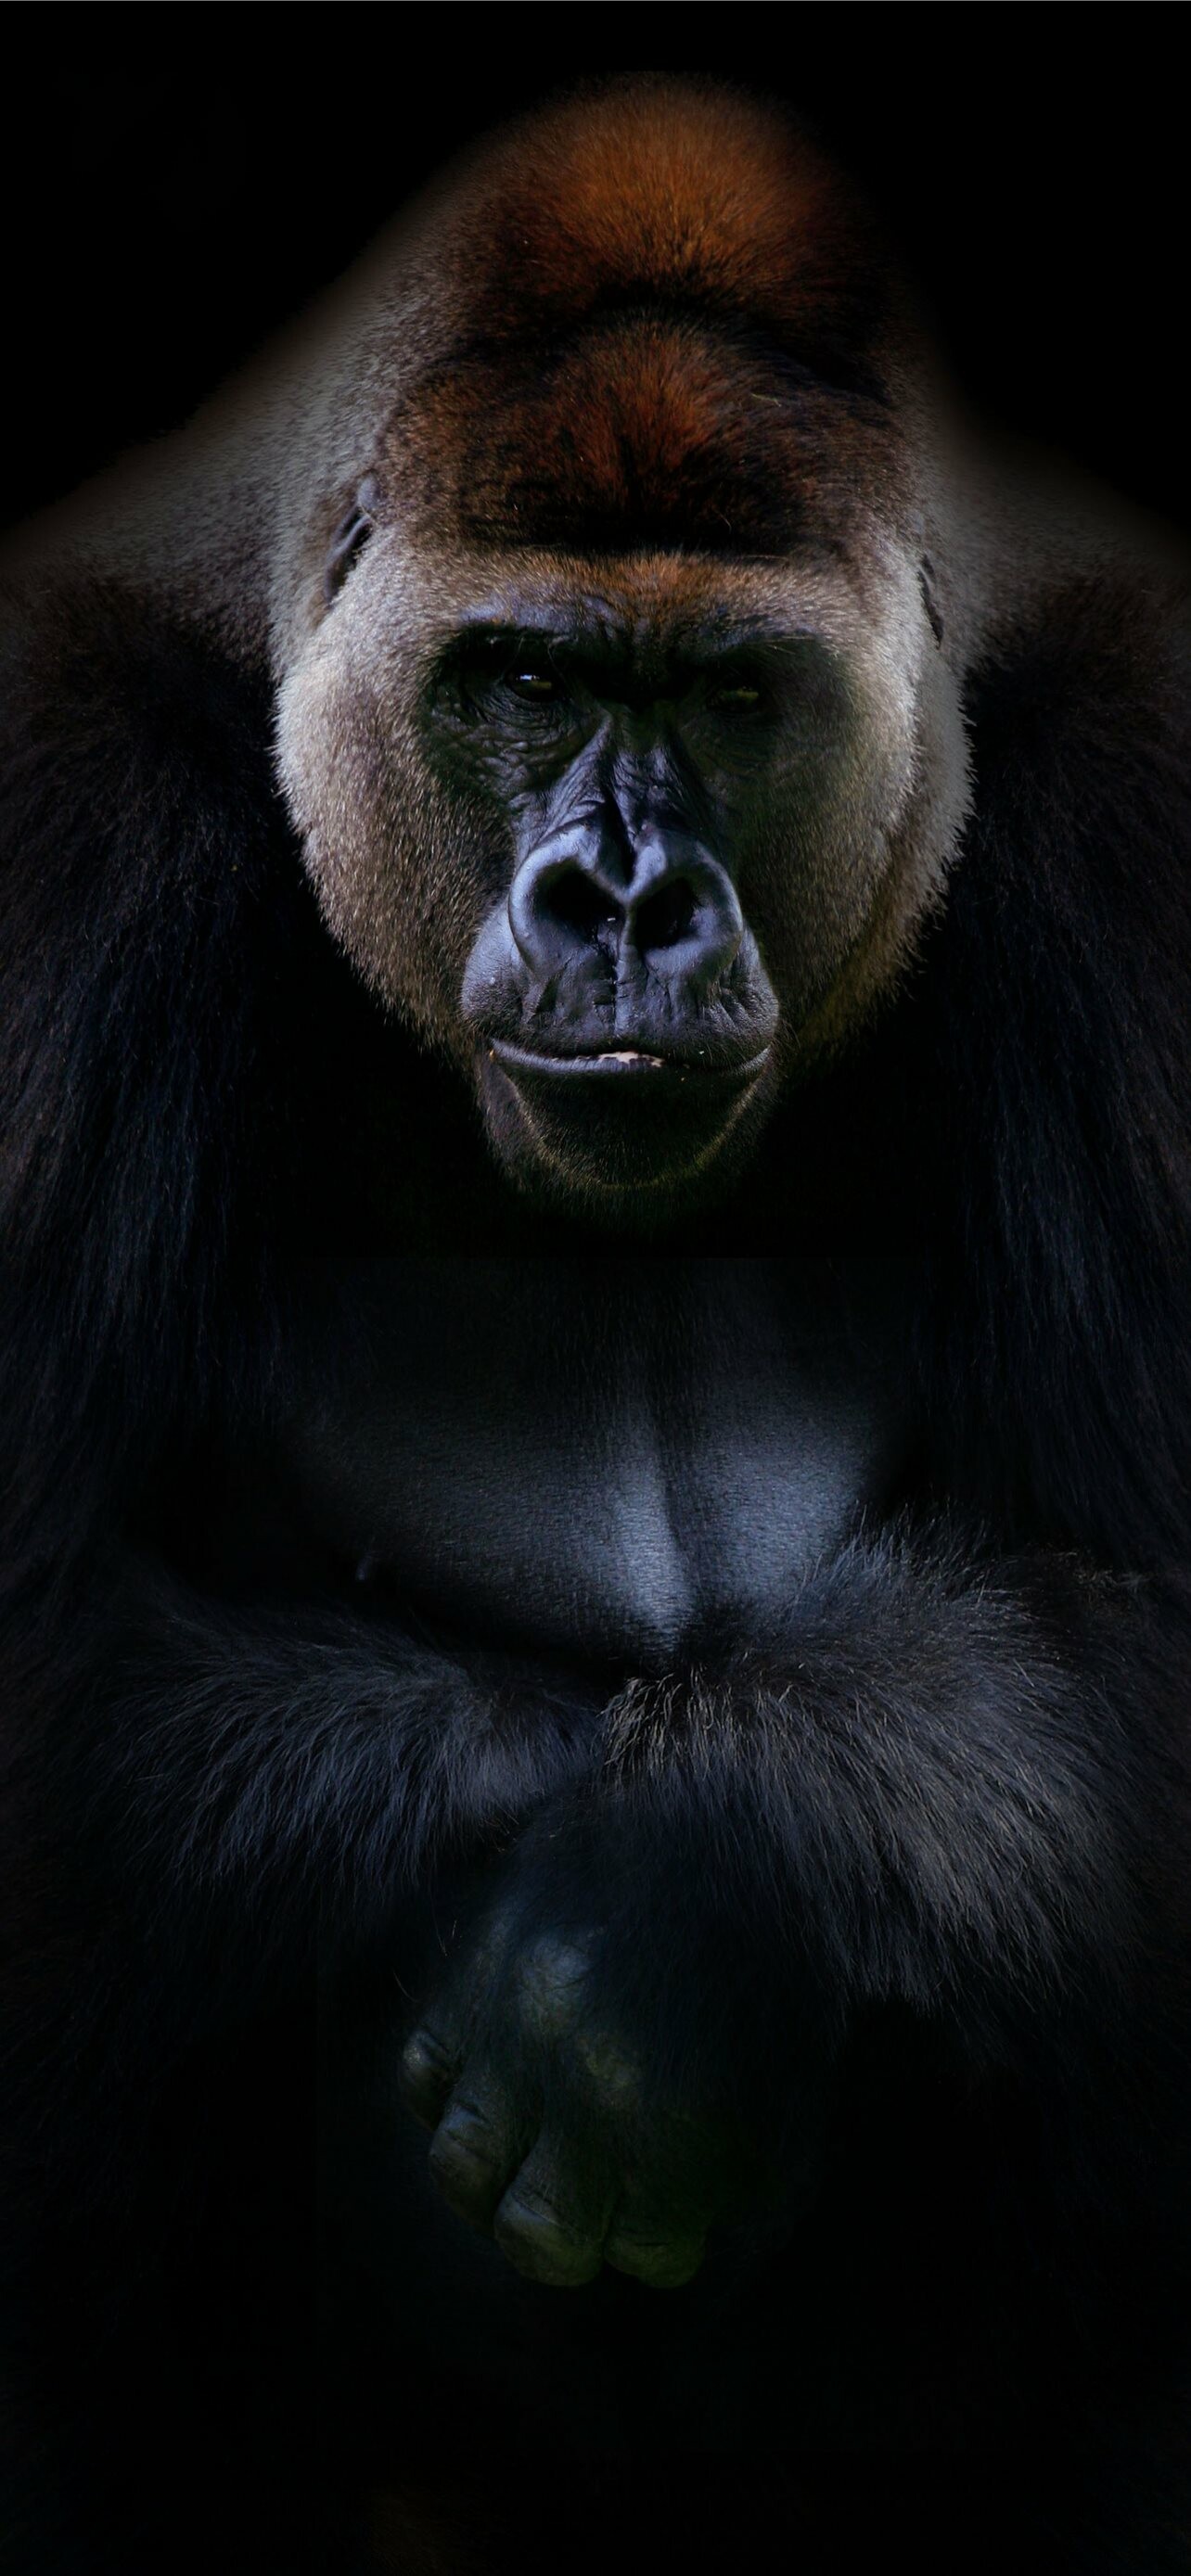 Ape: Gorillas are the largest living primates, reaching heights between 1.25 and 1.8 metres, weights between 100 and 270 kg, and arm spans up to 2.6 metres, depending on species and sex. 1290x2780 HD Background.